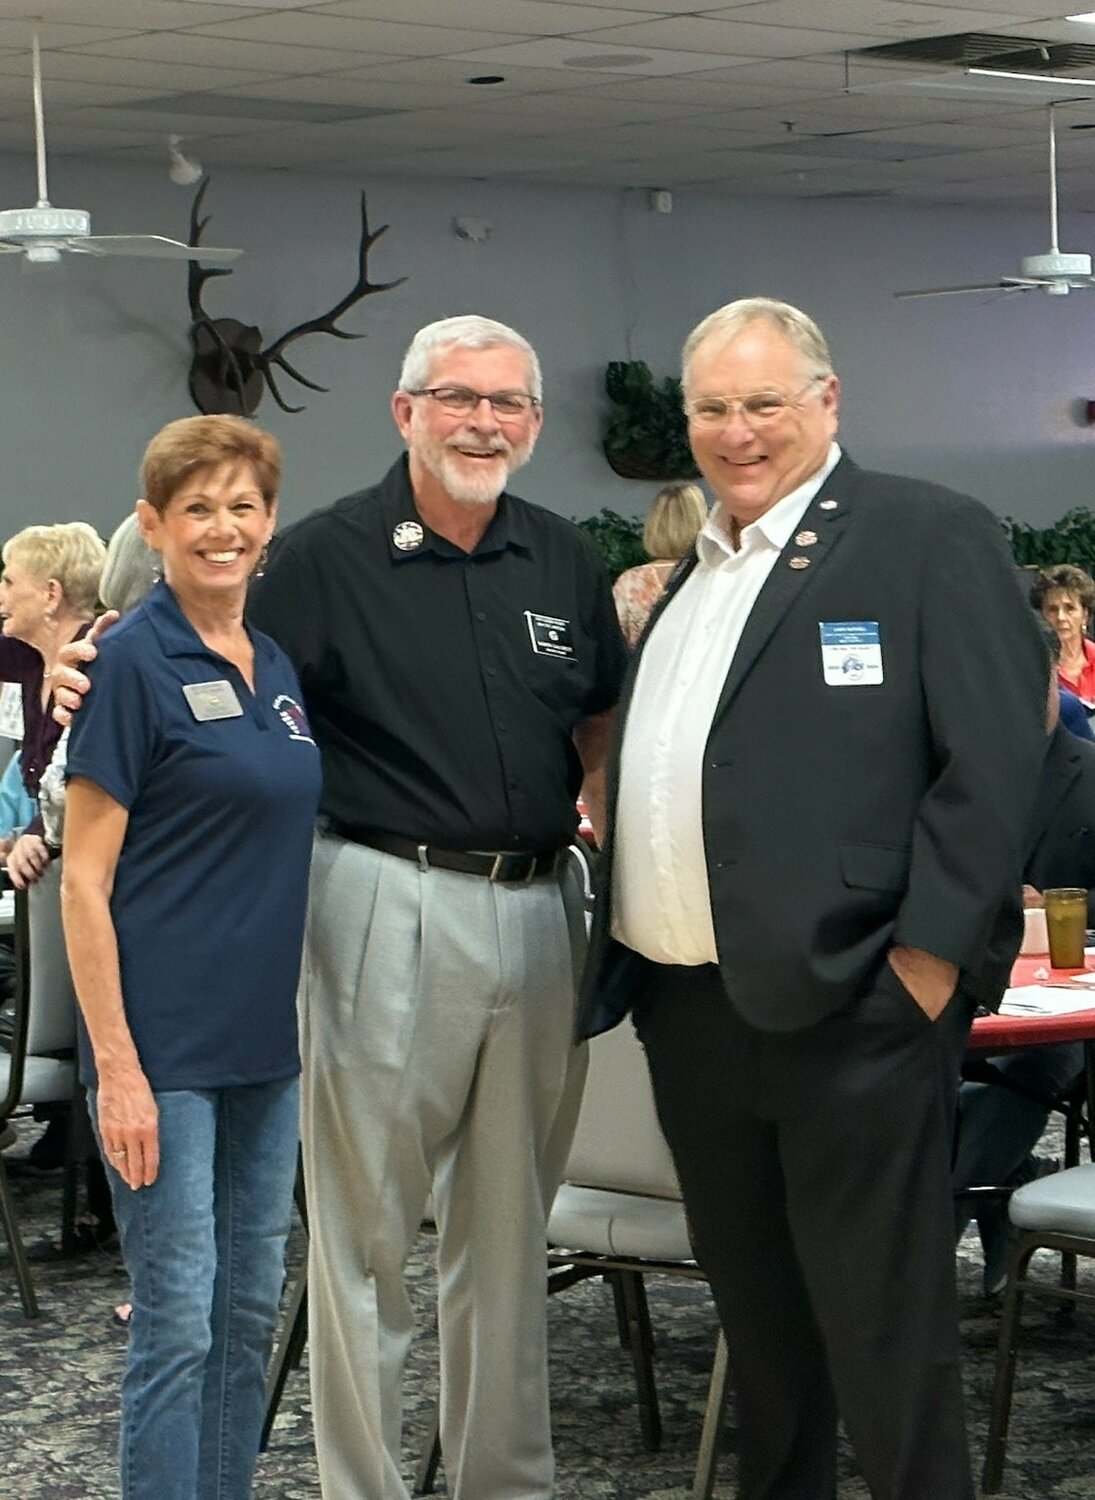 Elk members Vicki Way, Past Exalted Ruler and Veterans Services committee member, Marty Galchutt, Exalted Ruler, Sun City Elks, and Larry Bodwell, District Deputy Grand Exalted Ruler, West District.